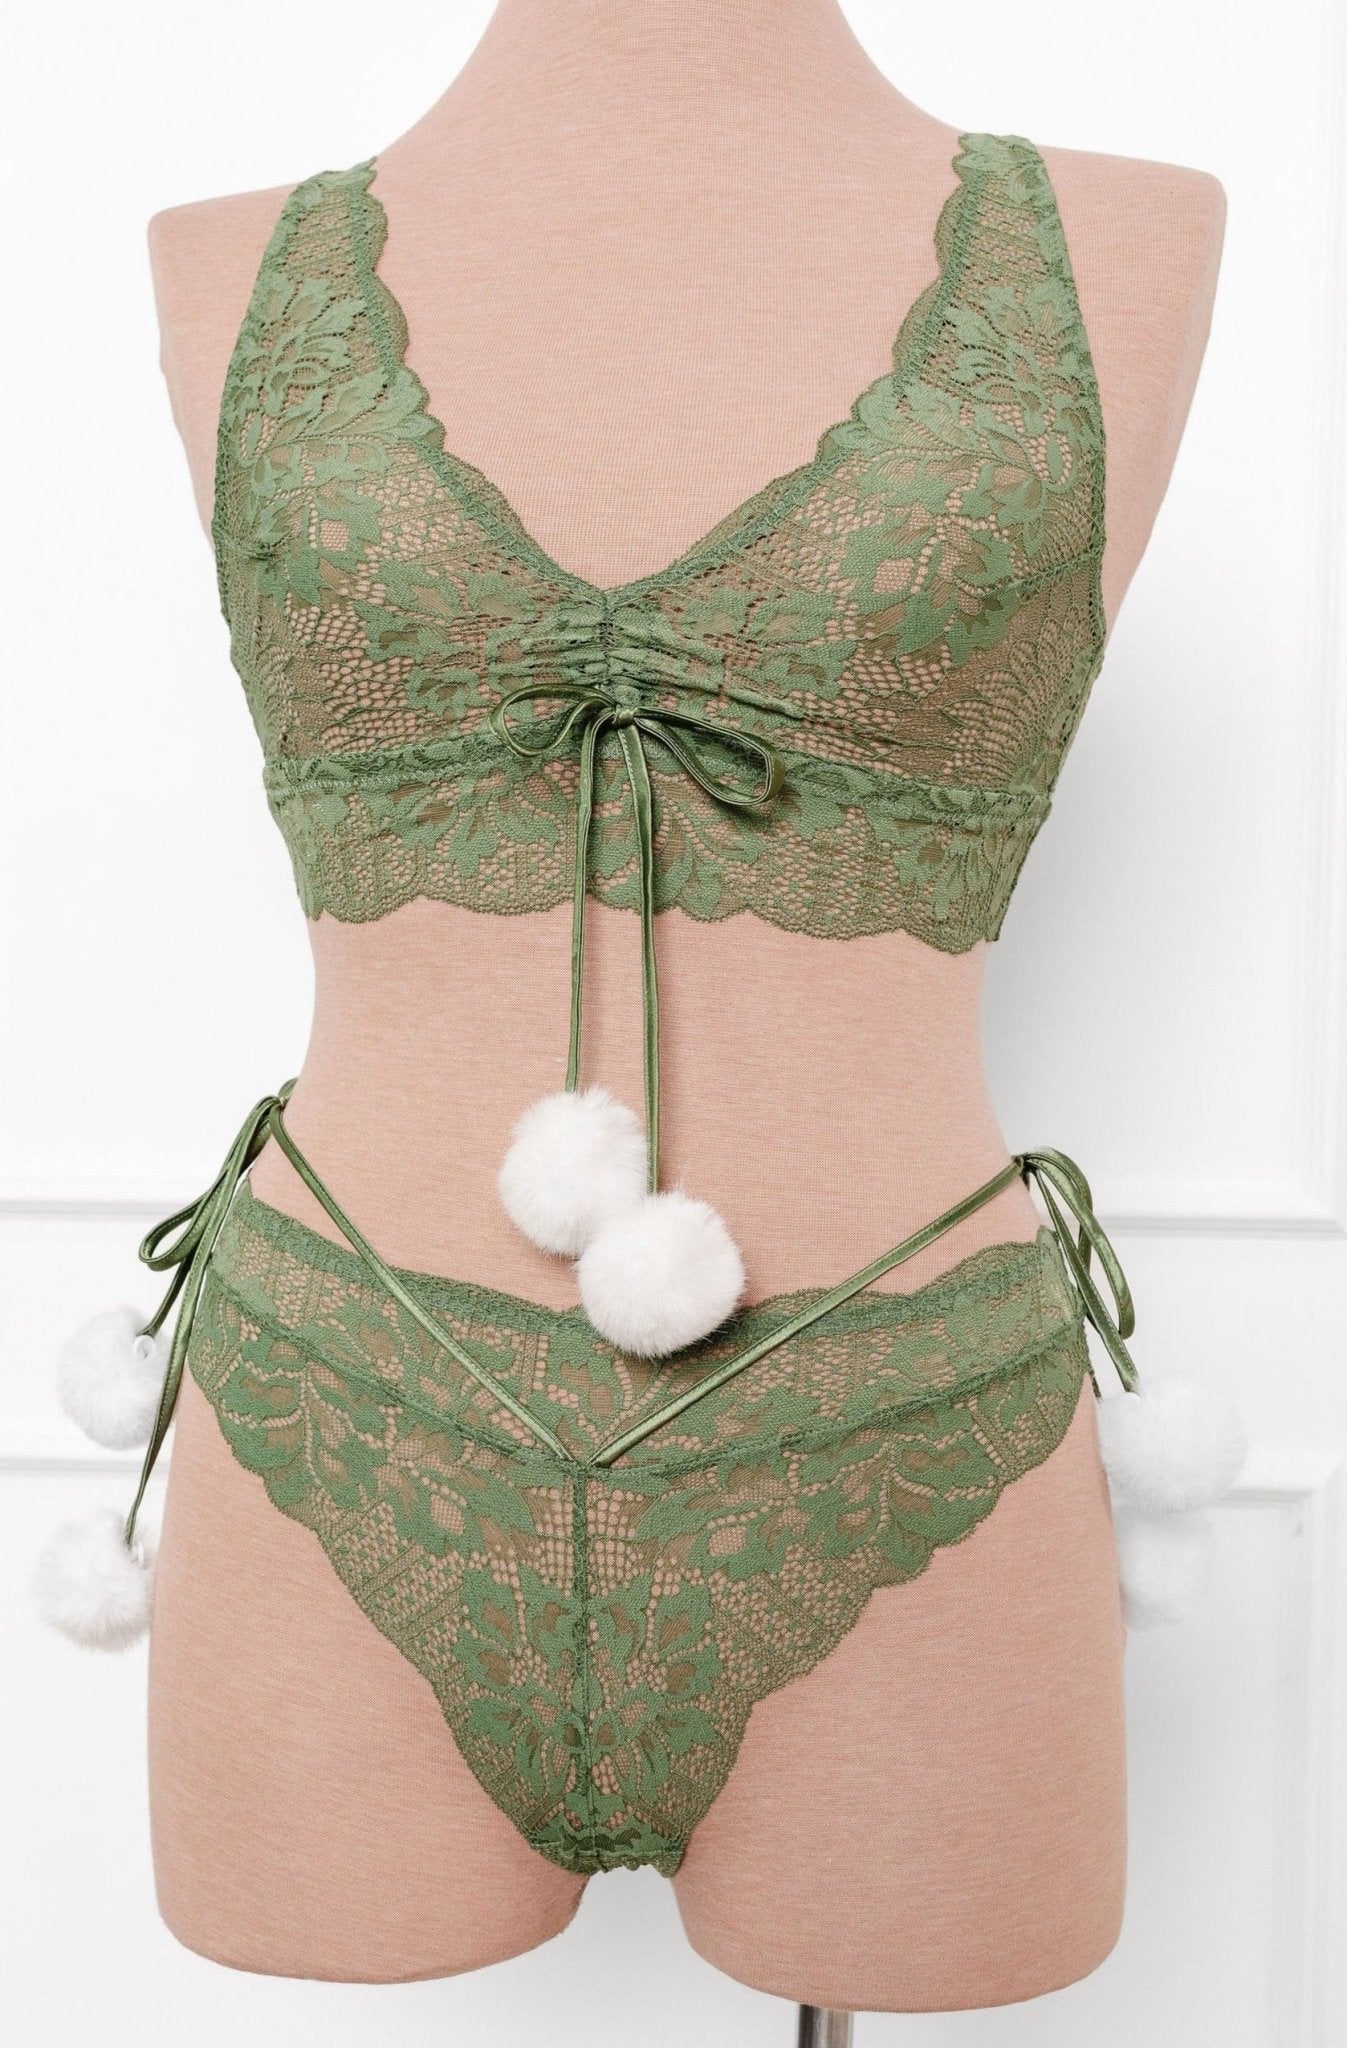 Lacy Crotchless Pom Pom Panty - Sage Green - Mentionables